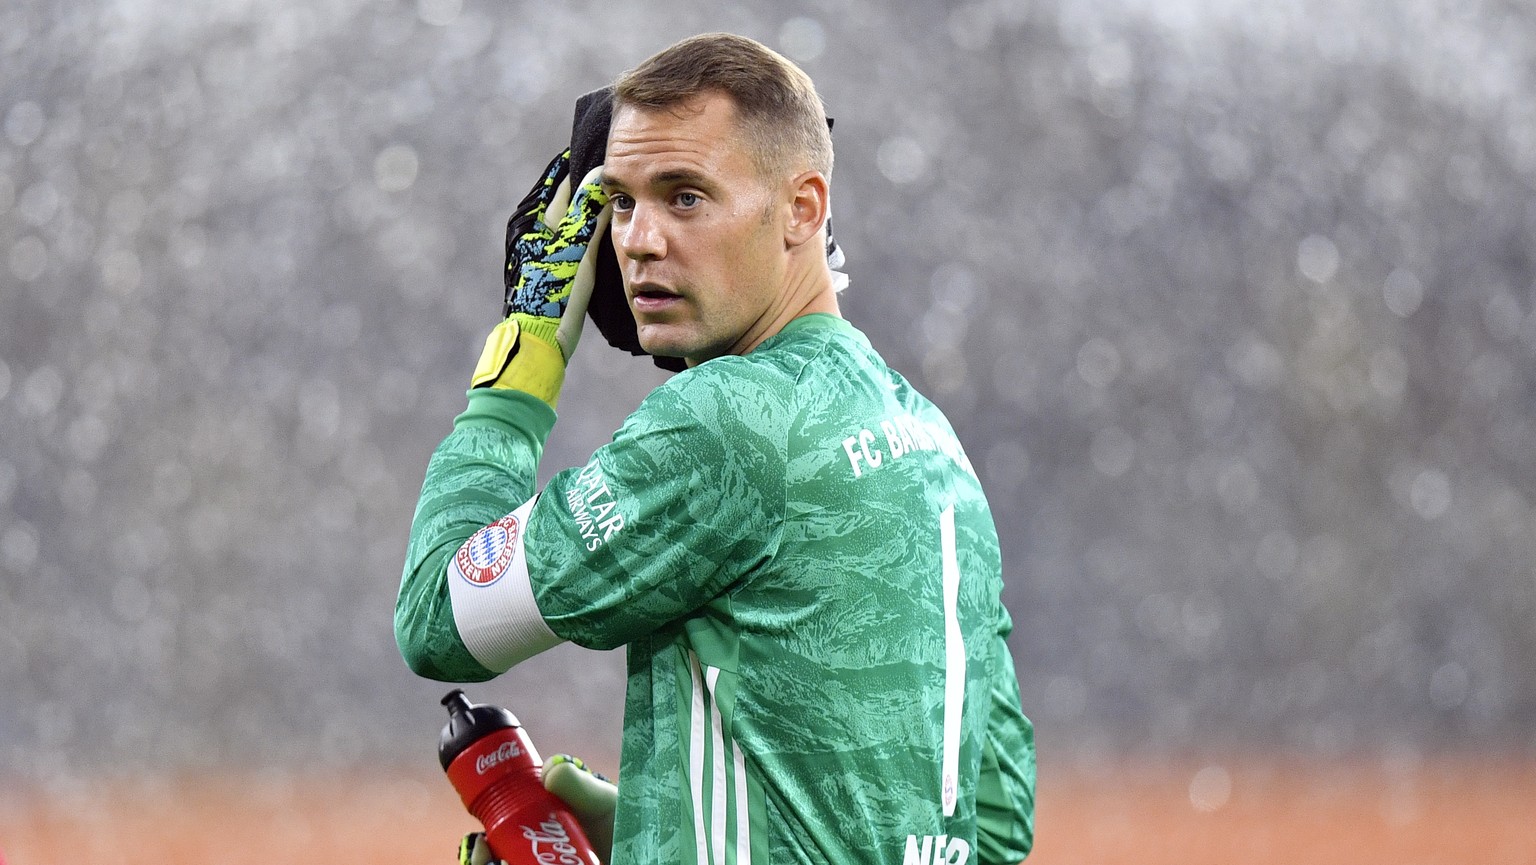 Bayern goalkeeper Manuel Neuer leaves the field after the first half of the German Supercup final soccer match between Borussia Dortmund and Bayern Munich in Dortmund, Germany, Saturday, Aug. 3, 2019. ...